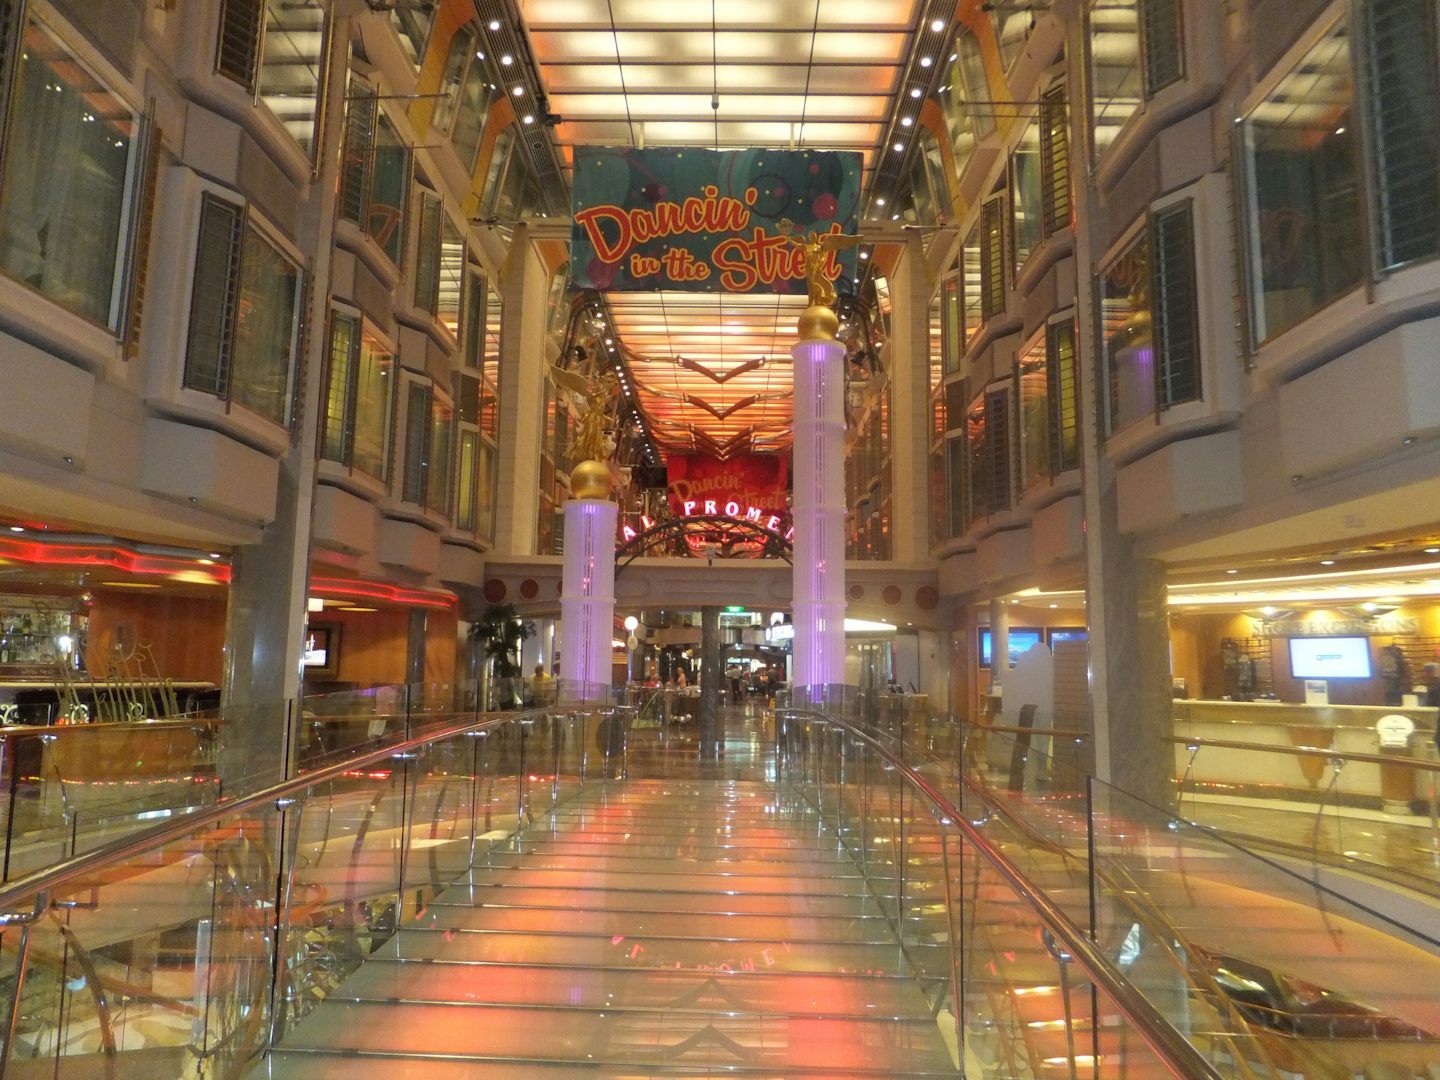 The Promenade at Freedom of the Seas